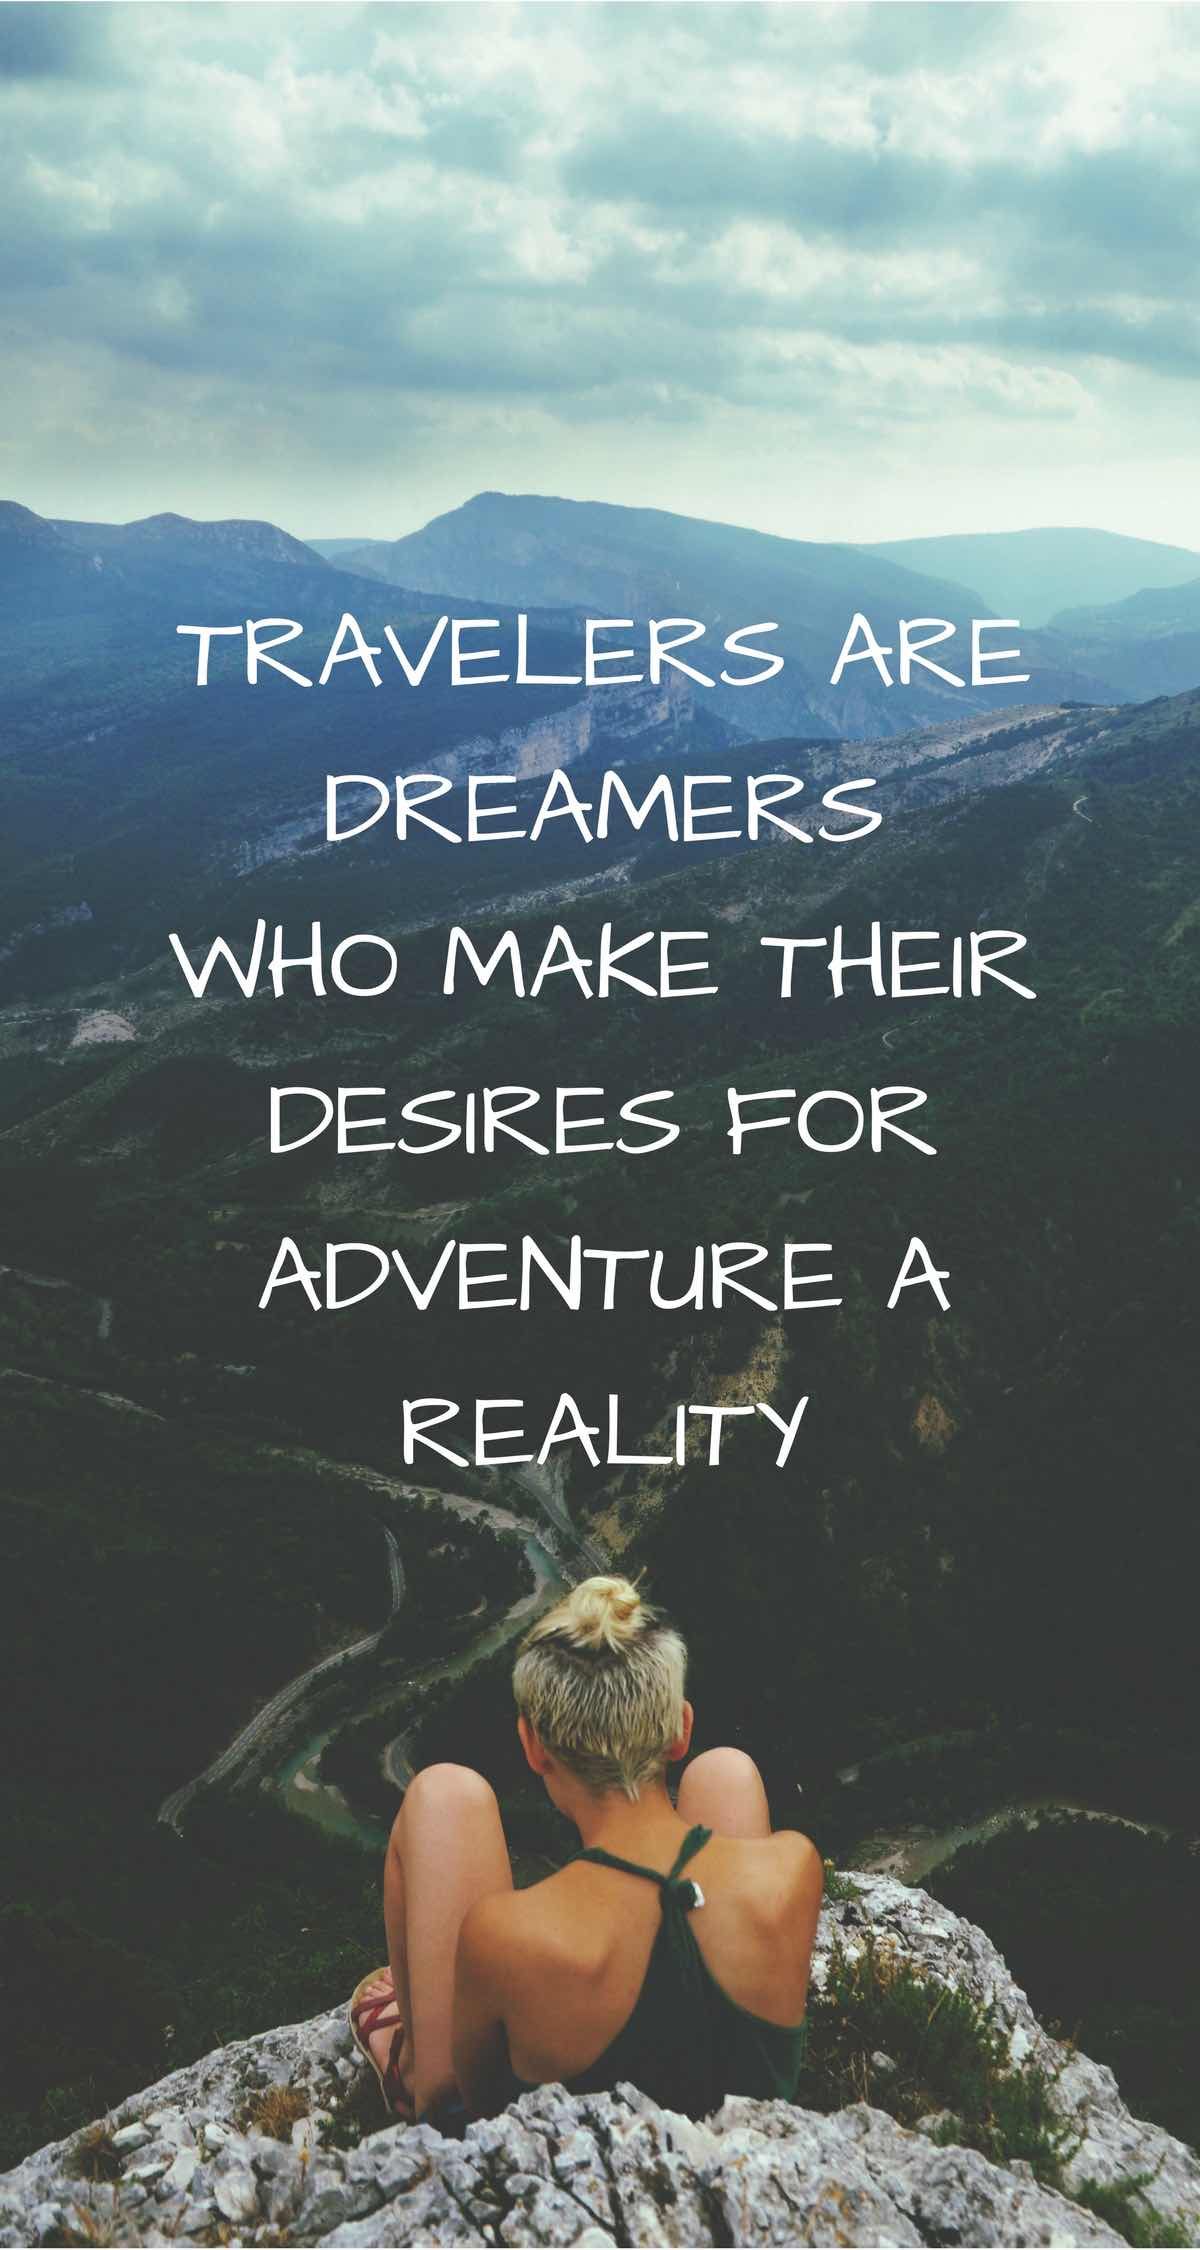 travelers are dreamers make adventure a reality quote - girl looking over mountains